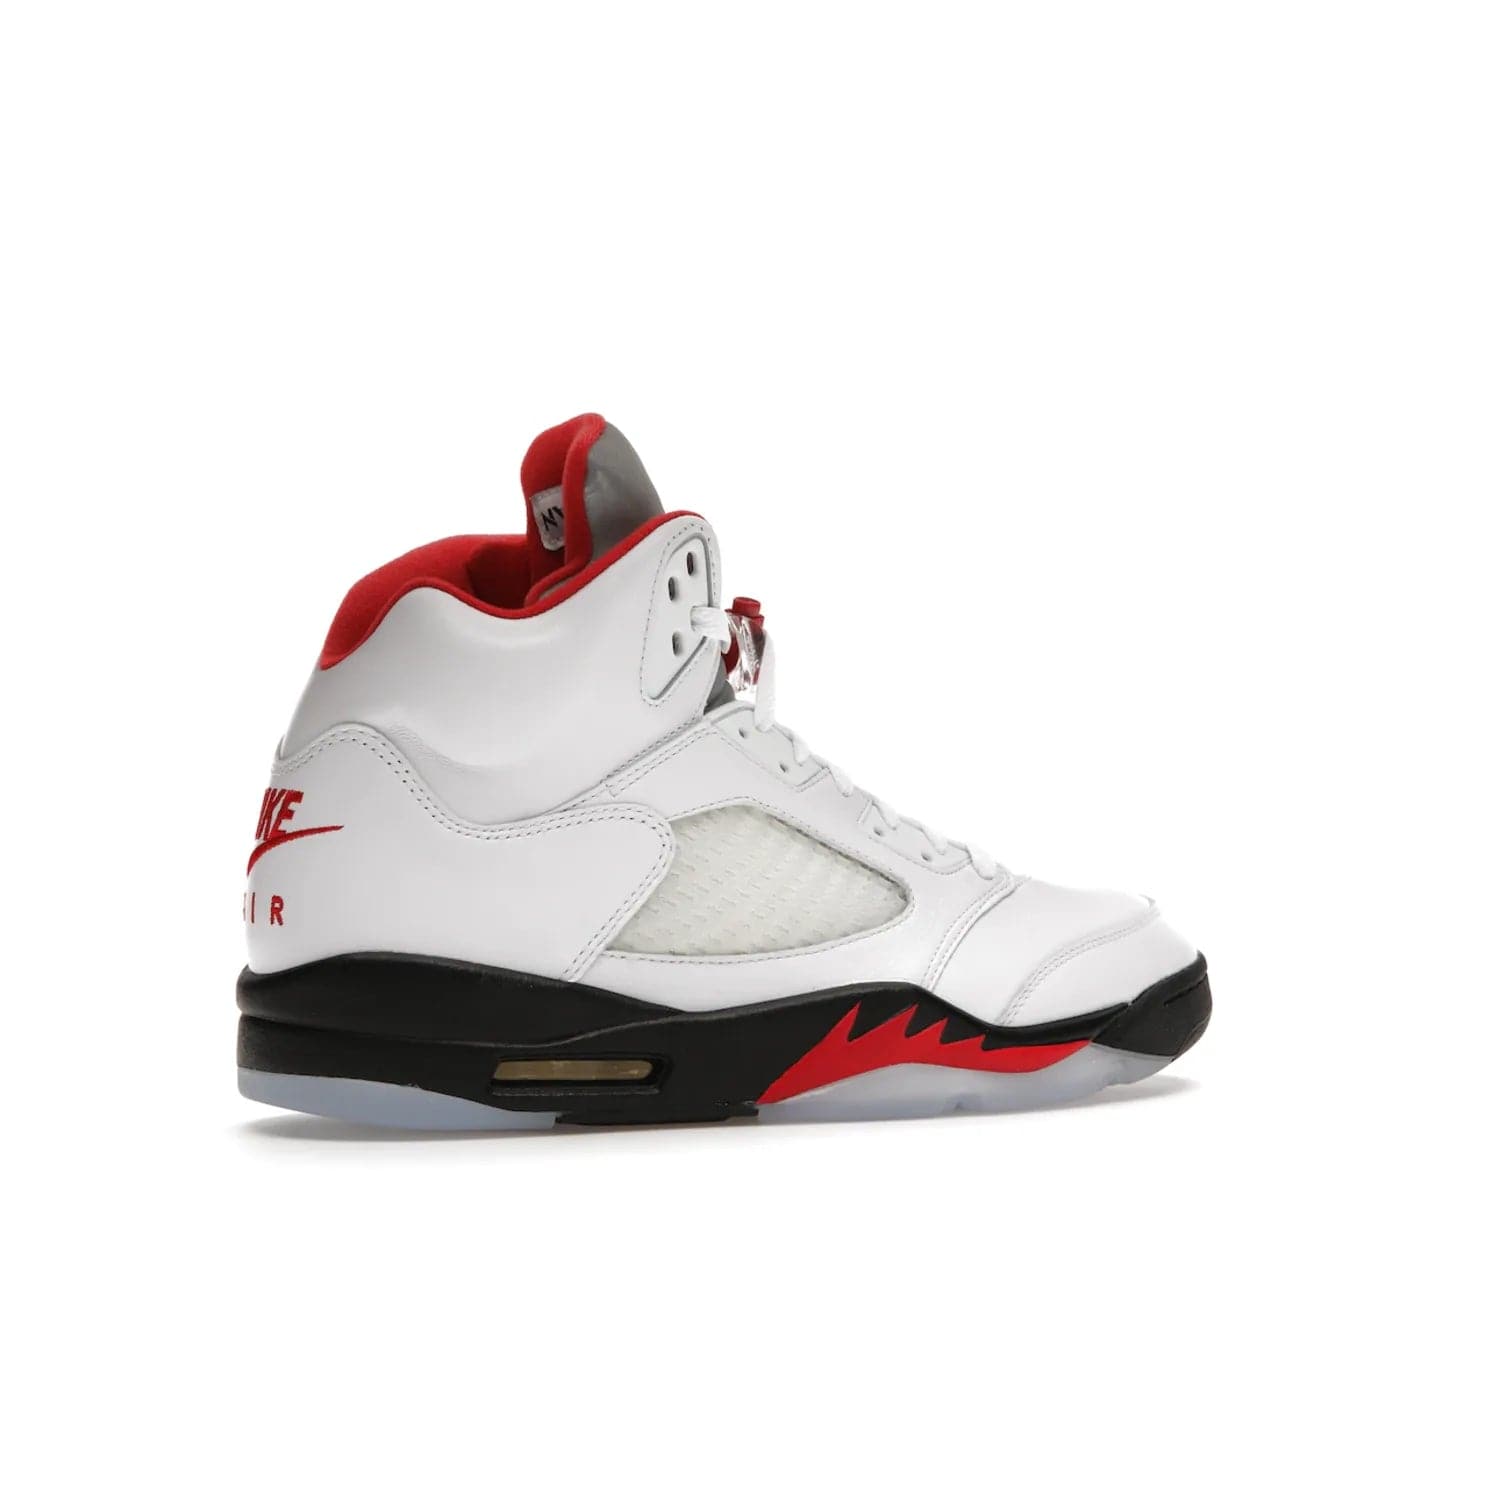 Jordan 5 Retro Fire Red Silver Tongue (2020) - Image 34 - Only at www.BallersClubKickz.com - Experience classic styling with the Jordan 5 Retro Fire Red Silver Tongue (2020). Features a white leather upper, 3M reflective tongue, midsole colorblocking, and an icy translucent outsole. Now available, upgrade your shoe collection today.